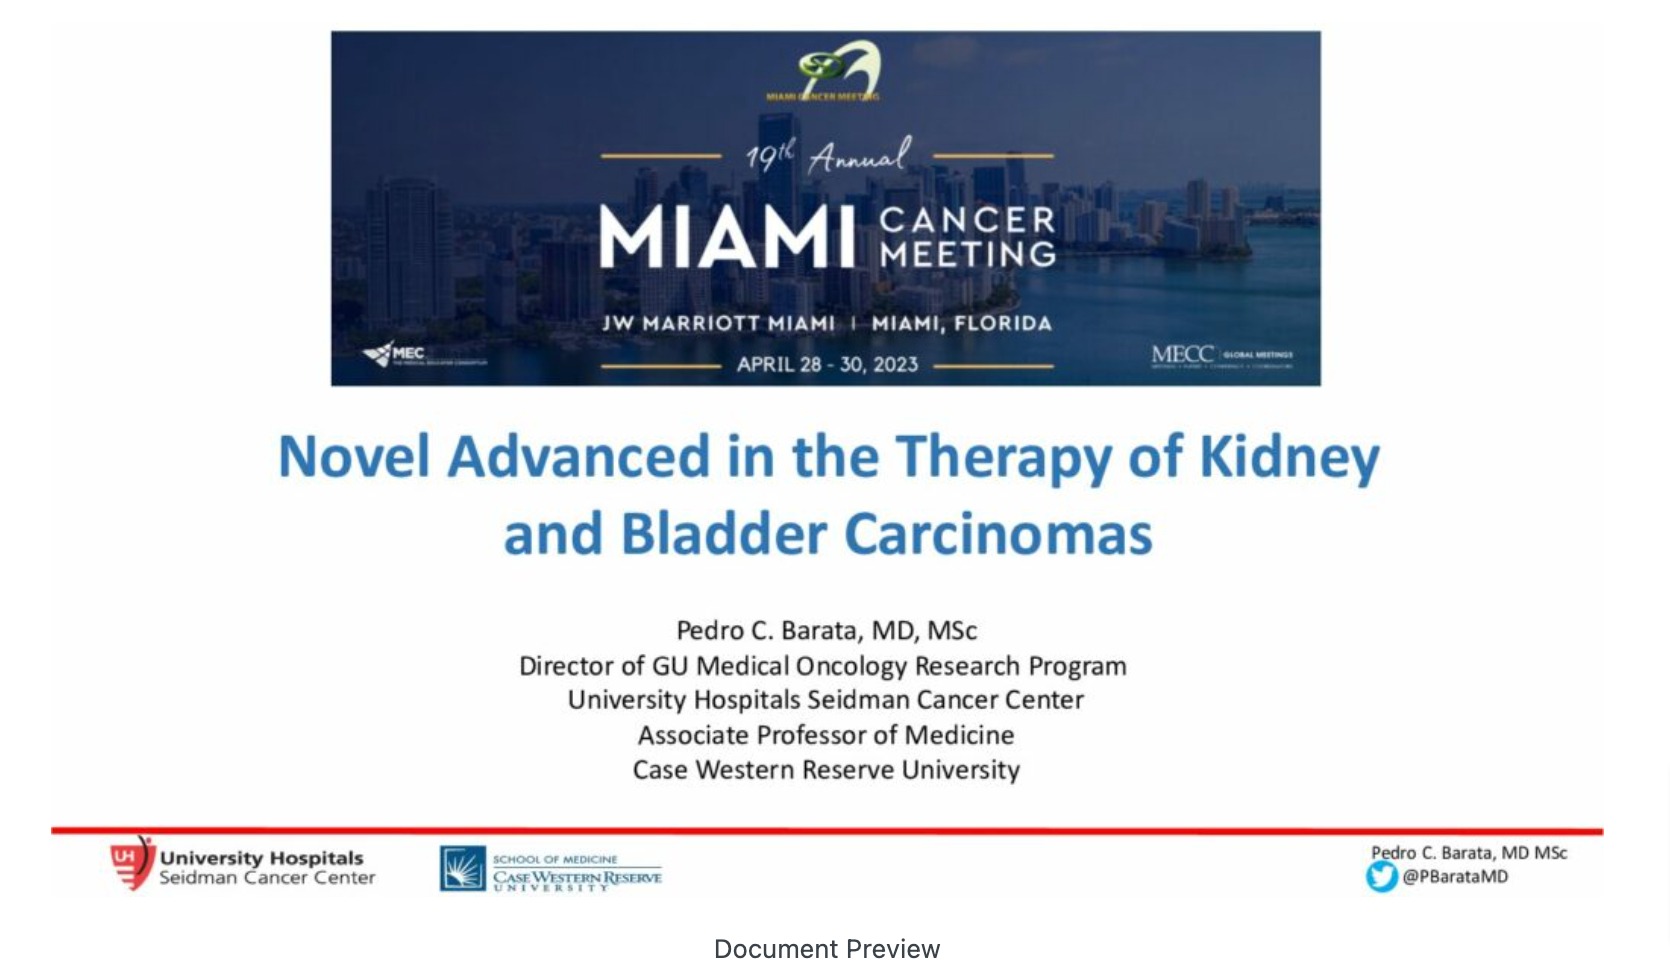 Novel Advances in the Therapy of Kidney and Bladder Carcinomas